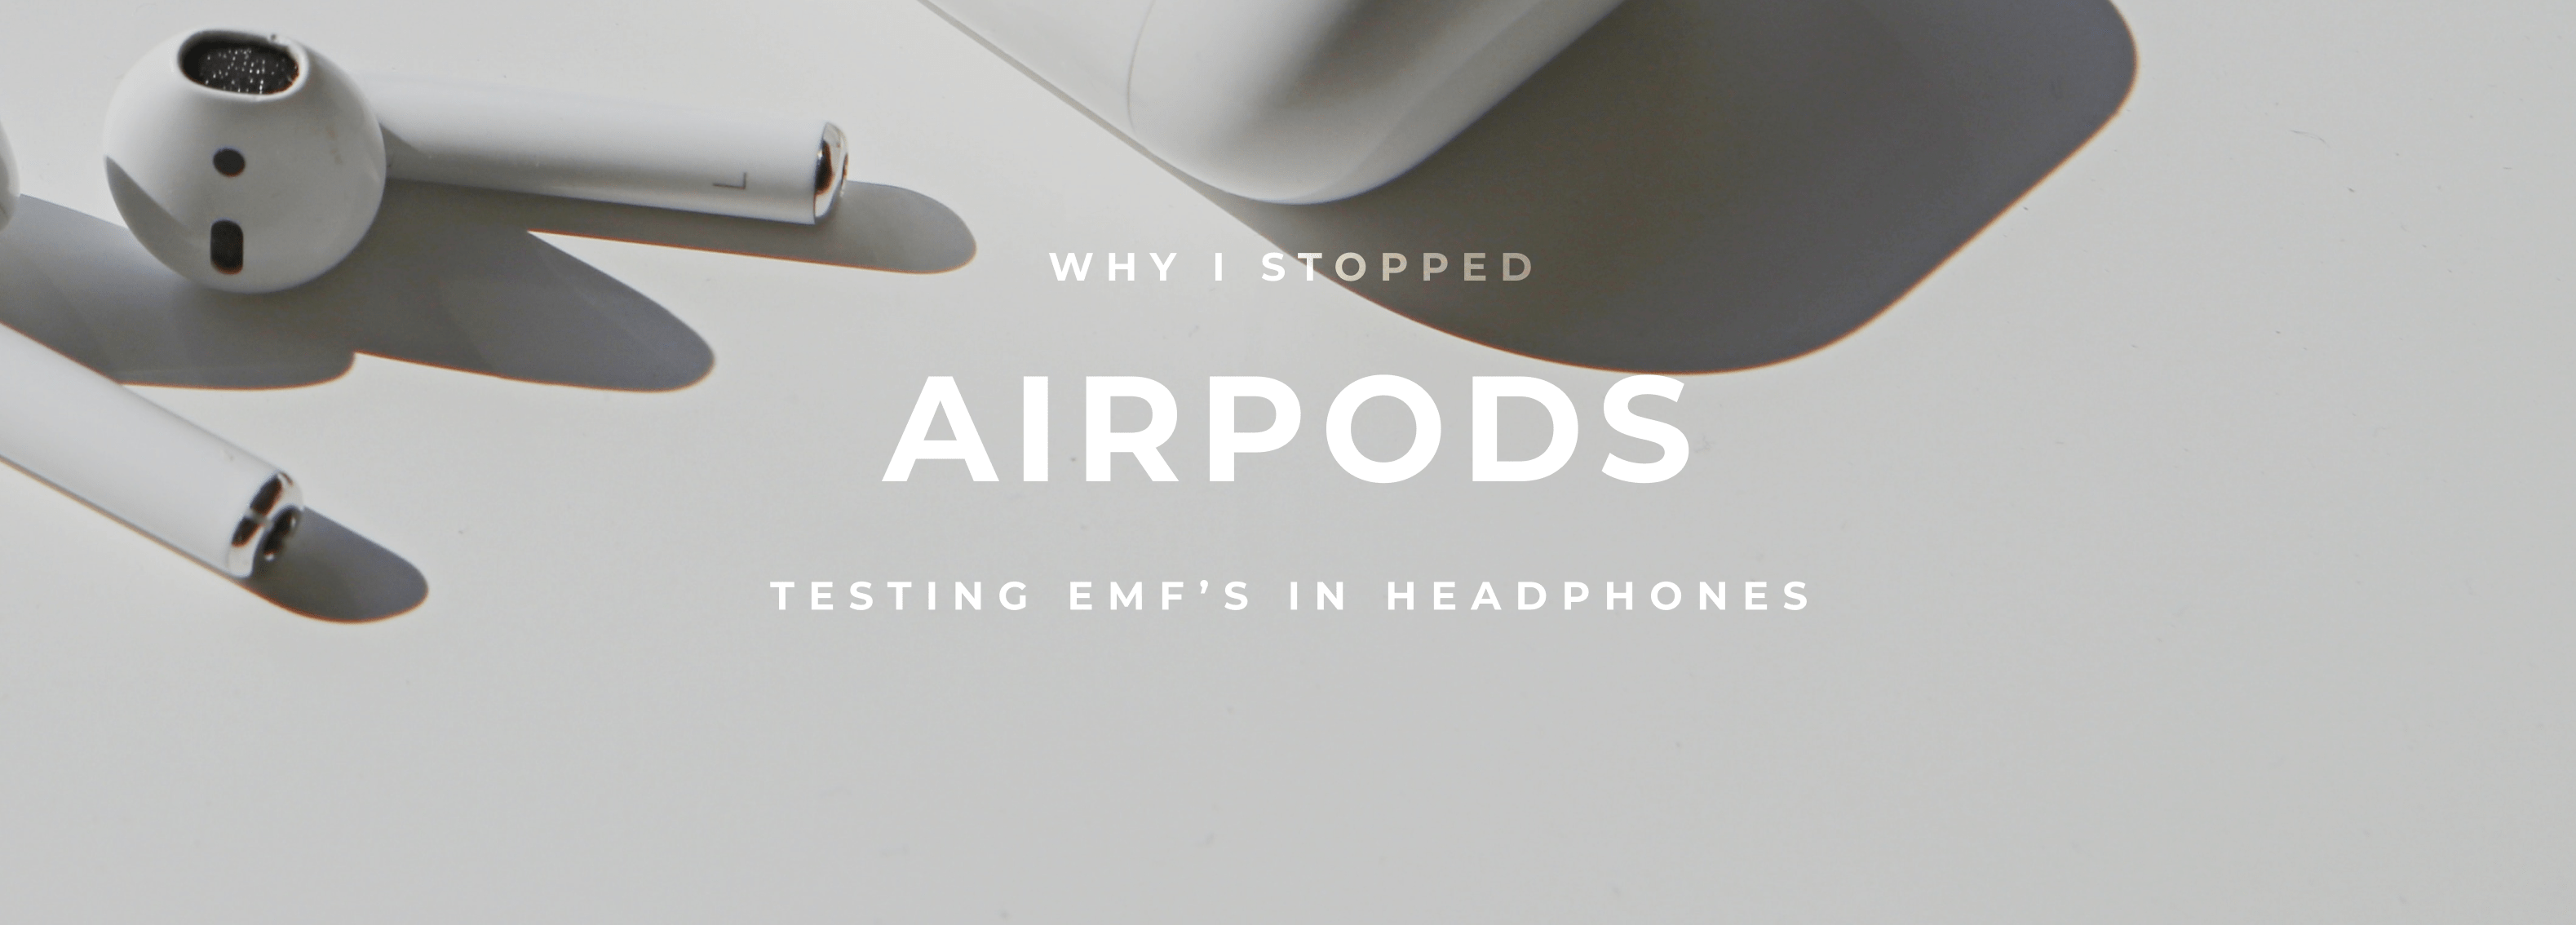 AirPods User Guide - Apple Support (TJ)